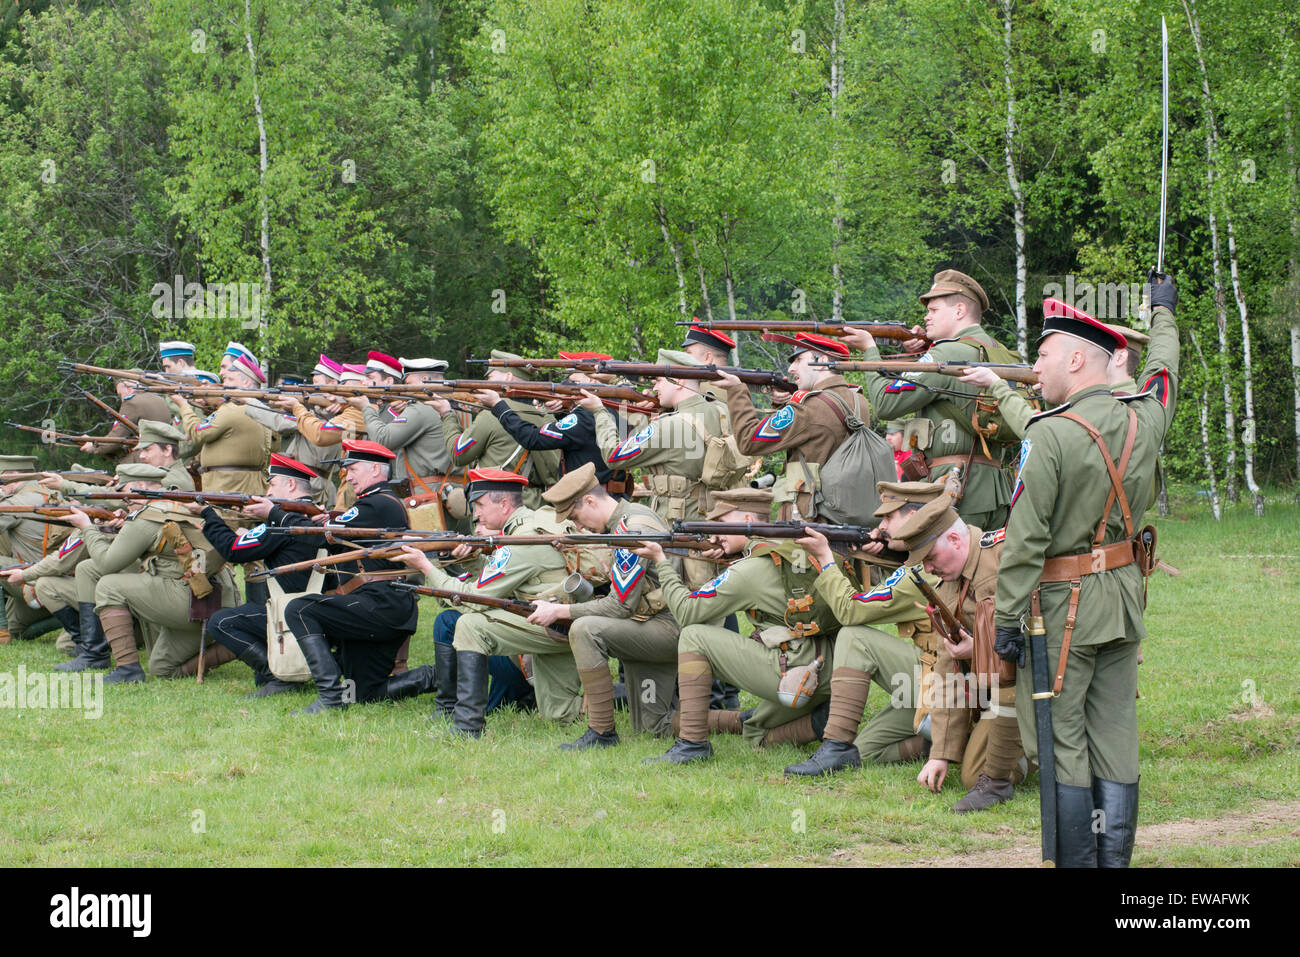 RUSSIA, CHERNOGOLOVKA - MAY 17: Kornilovs hiking squad shooting from rifles on History reenactment of battle of Civil War in 1914-1919 on May 17, 2014, Russia Stock Photo